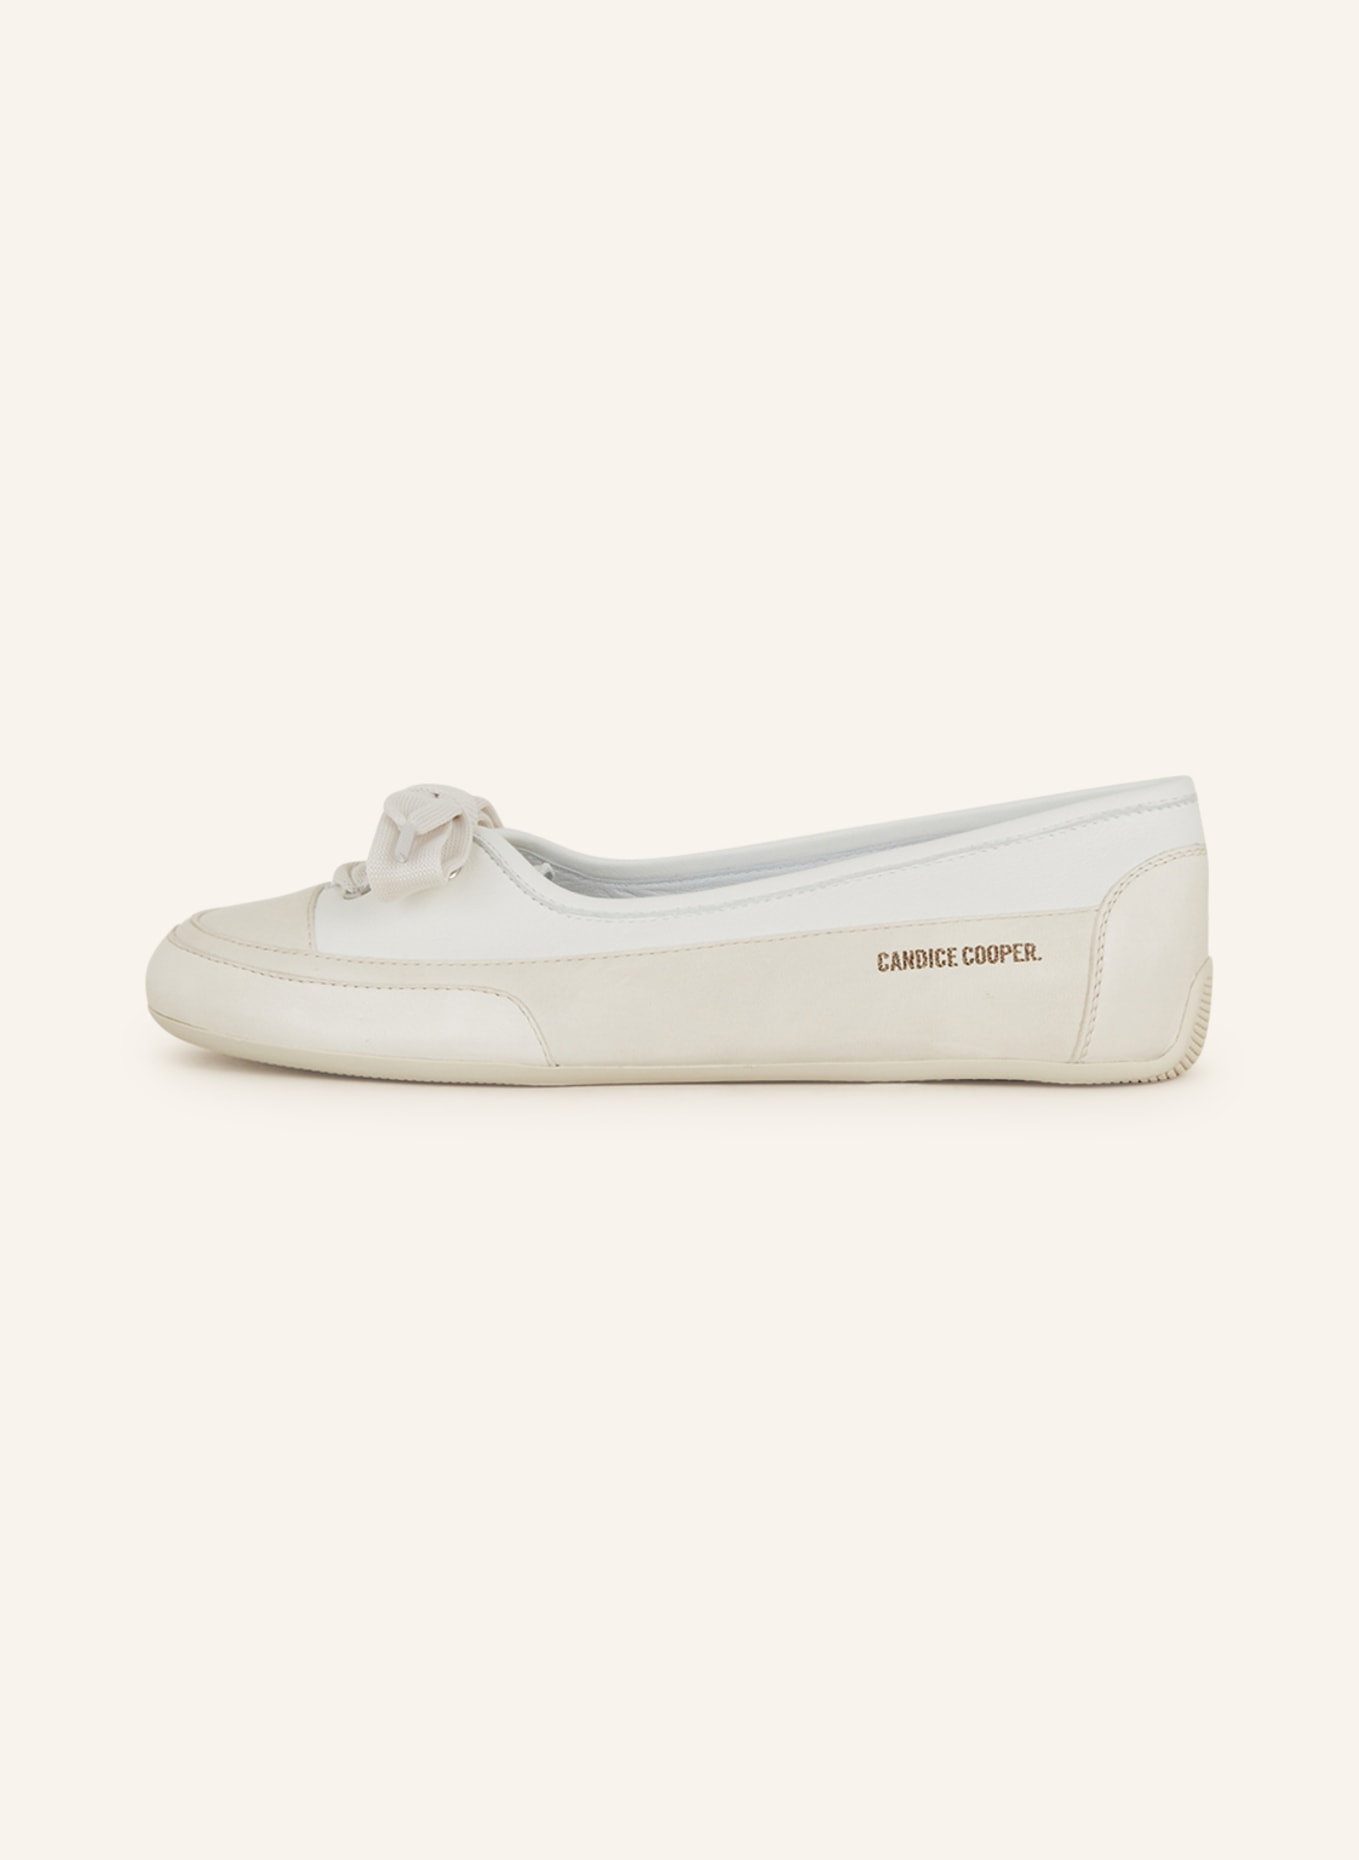 Candice Cooper Ballet flats CANDY BOW, Color: CREAM/ WHITE (Image 4)